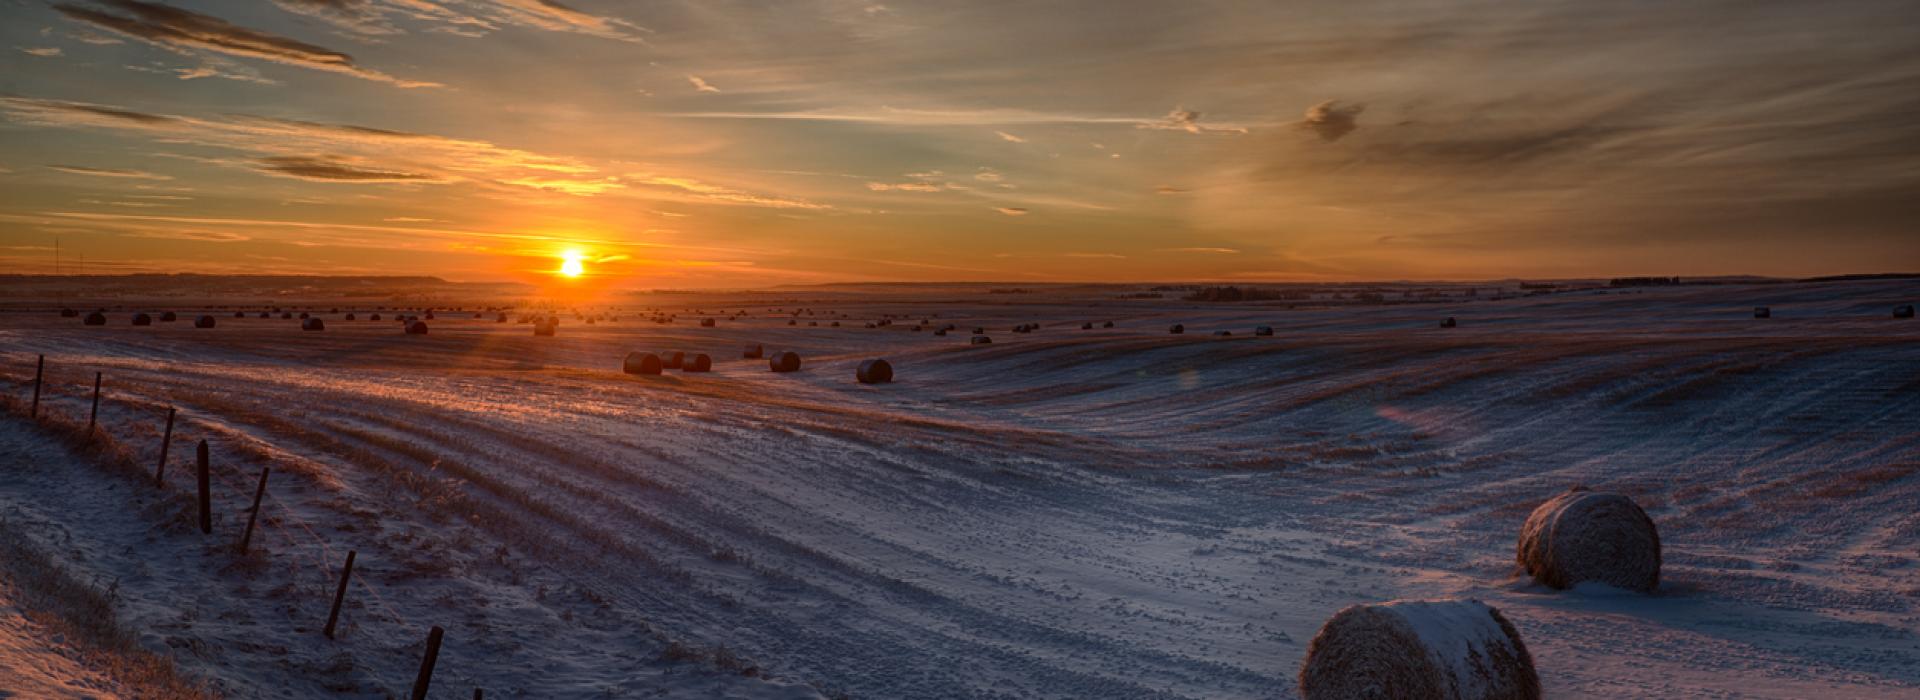 The sun sets on farm field in mid-winter. A skiff of snow covers the ground and the round hay bales that dot the scene.